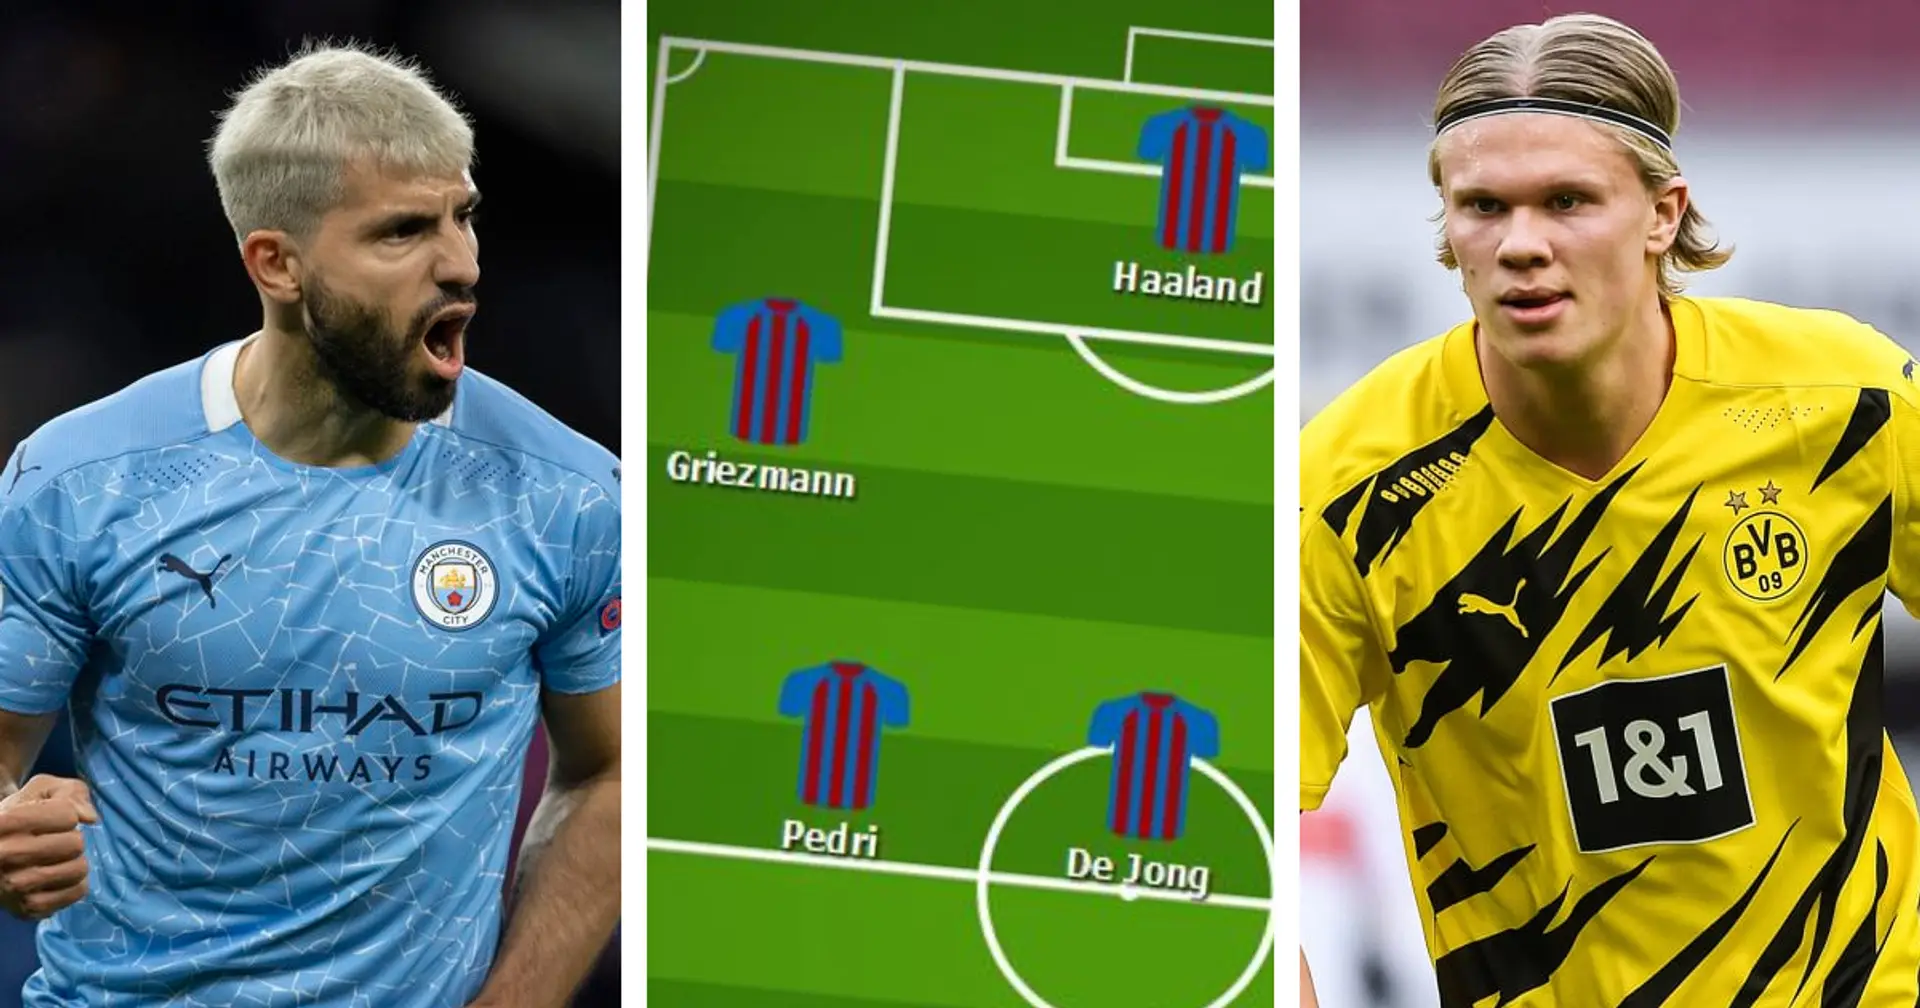 Aguero or Haaland in? What is your preferred Barca attack next season with new signings?